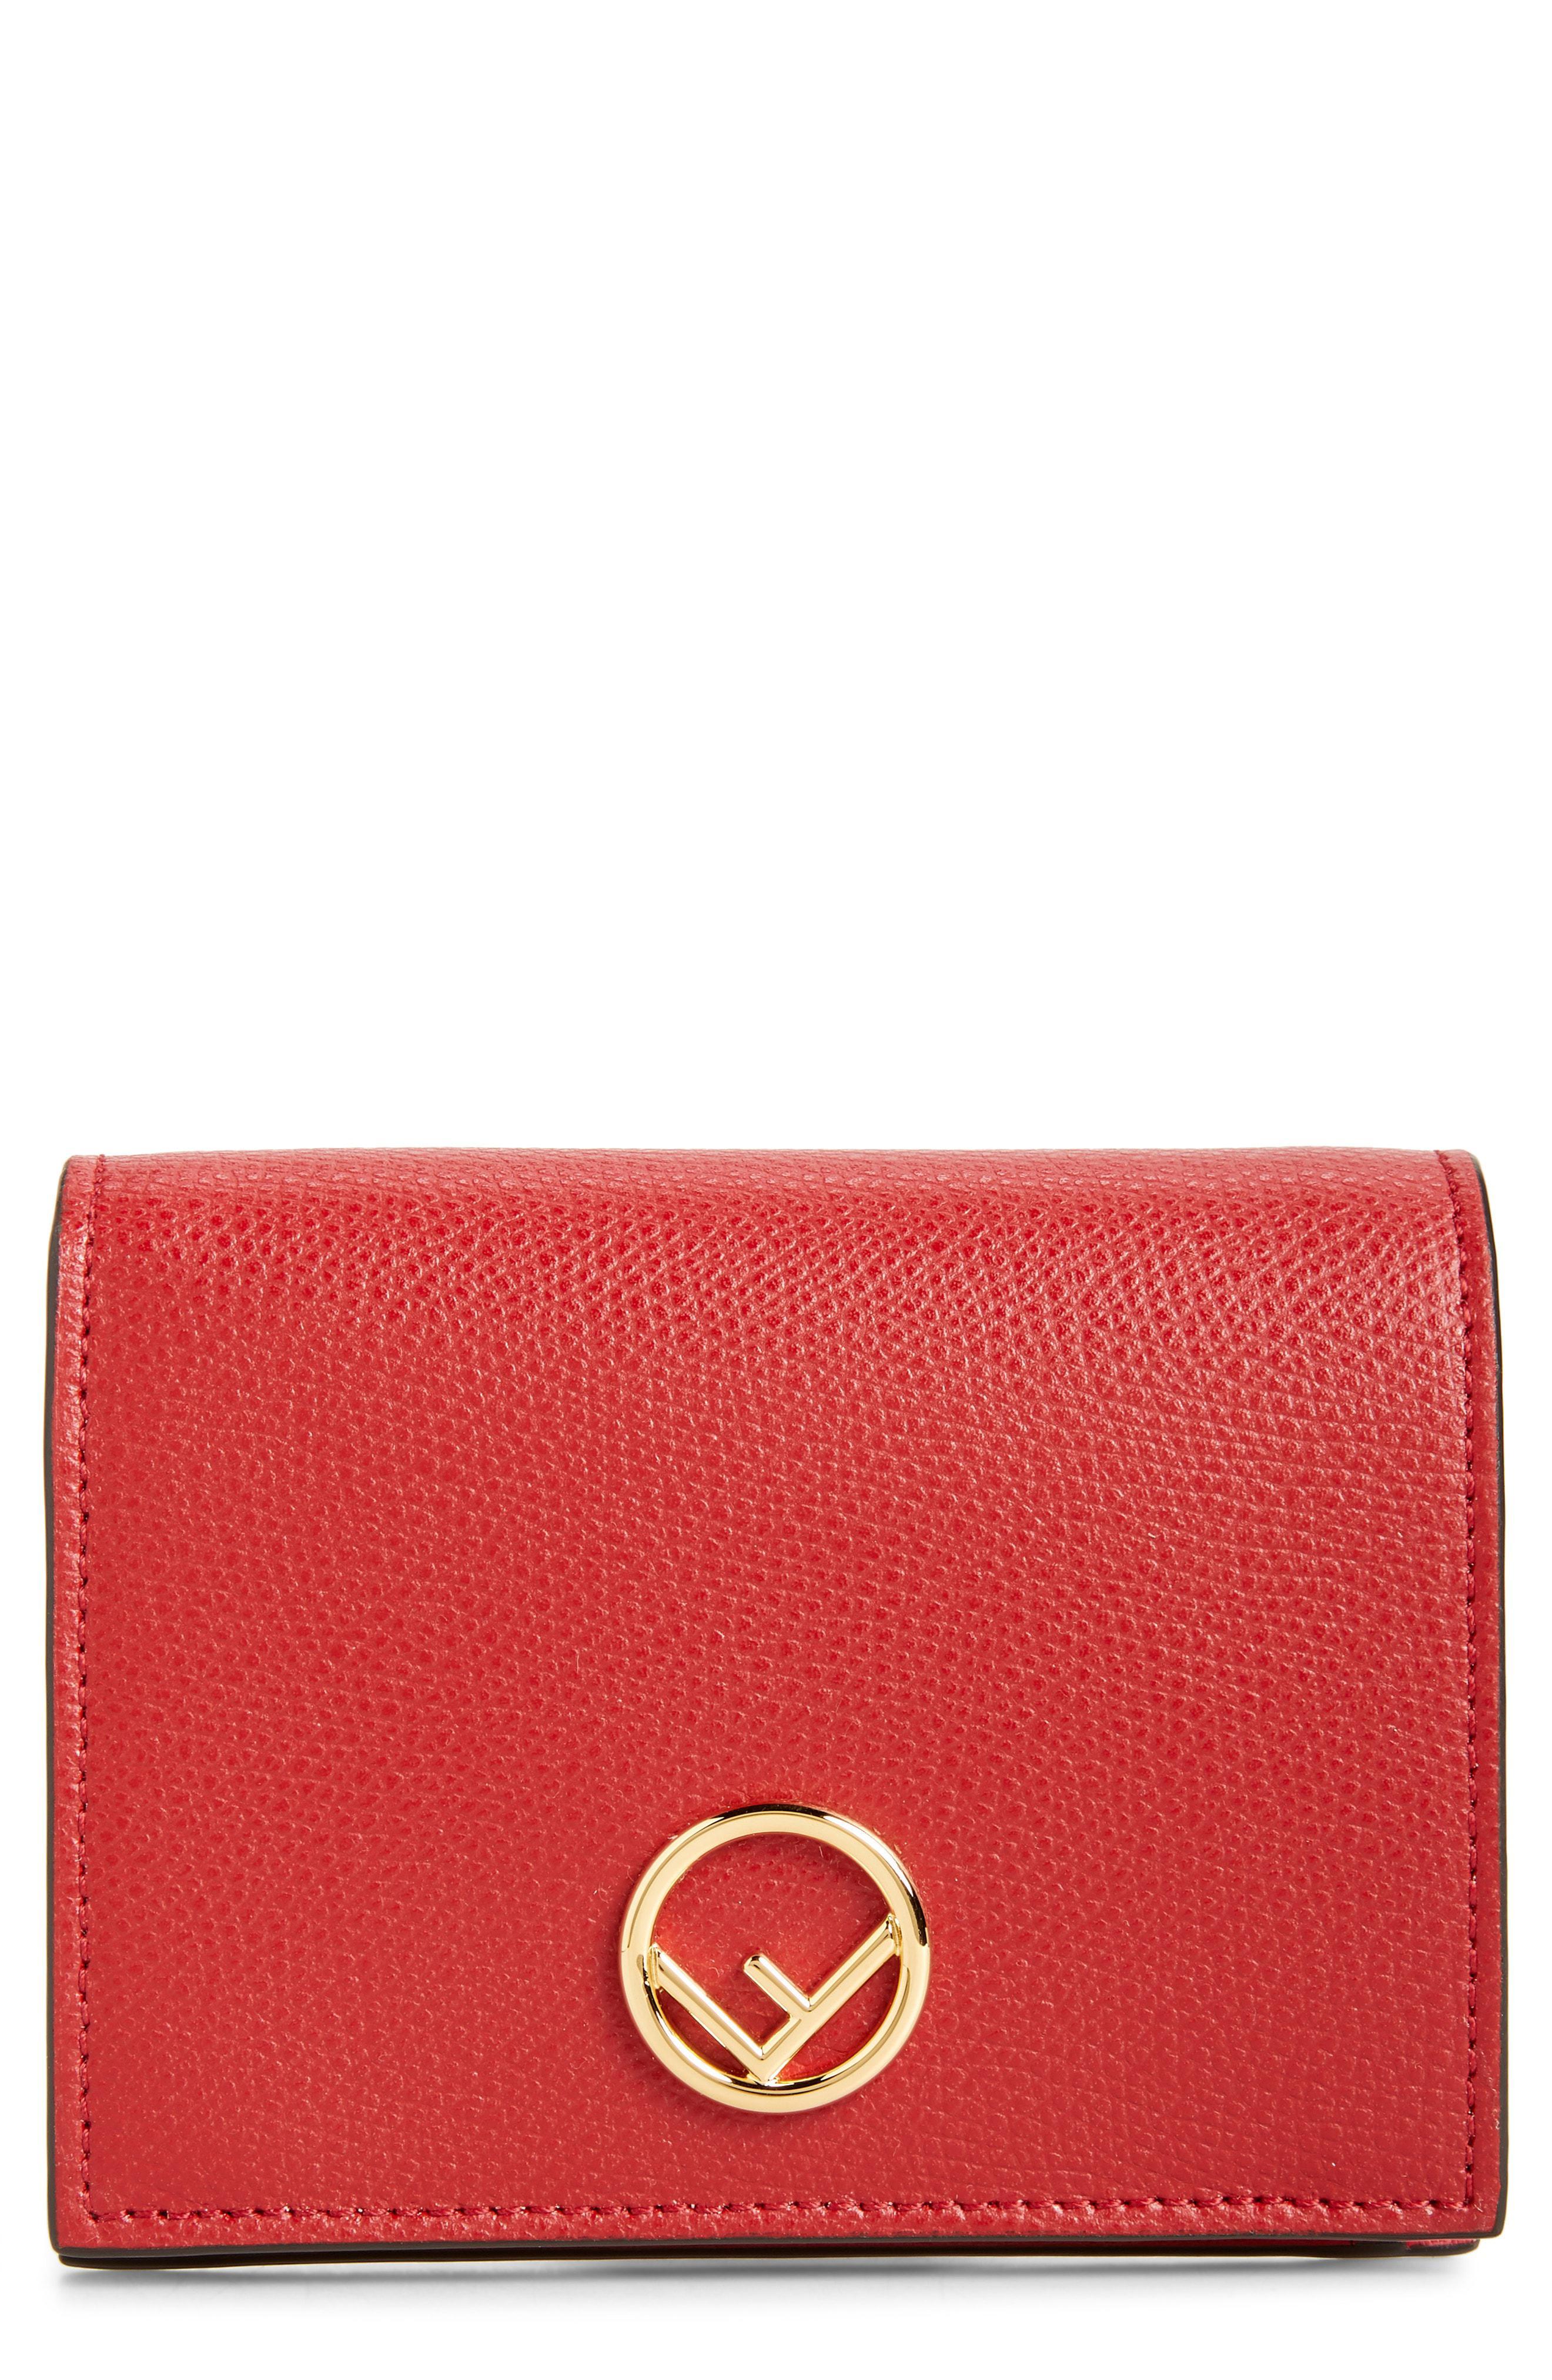 Red French Logo - Lyst - Fendi Logo Small Leather French Wallet in Red